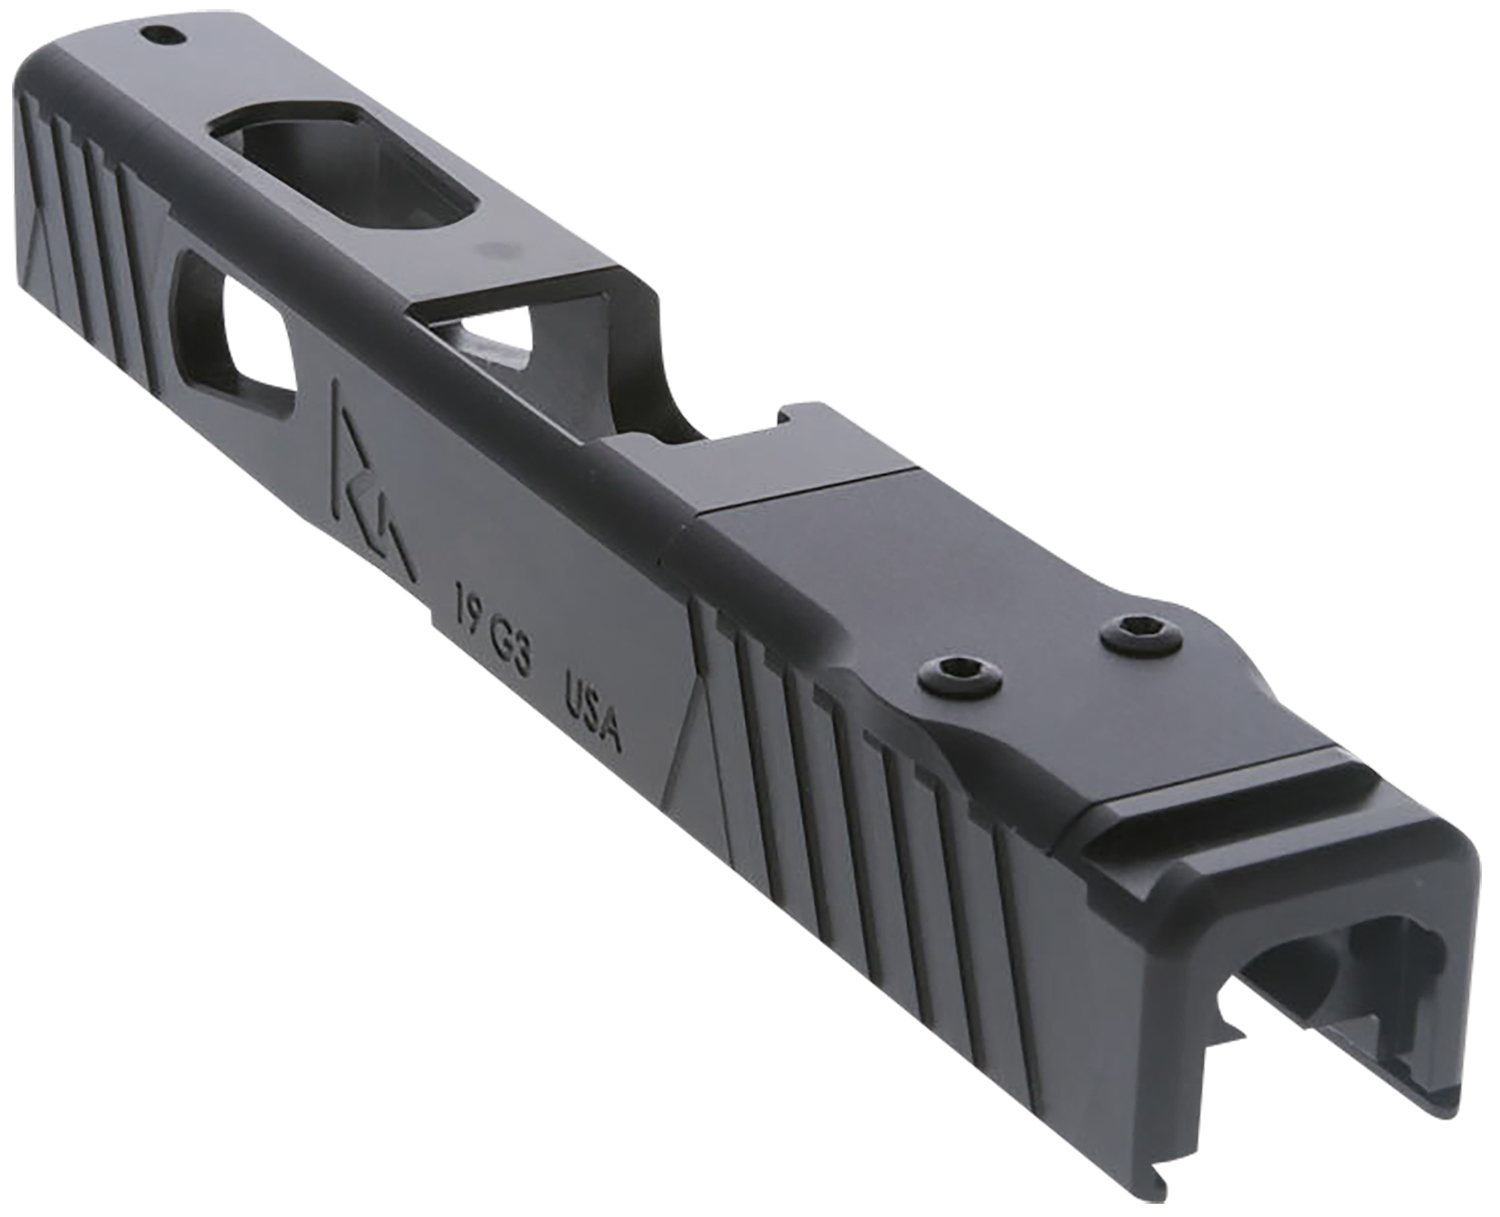 RIVAL ARMS GLOCK STRIPPED SLIDE W/RMR CUT FOR G19 G3 BLK